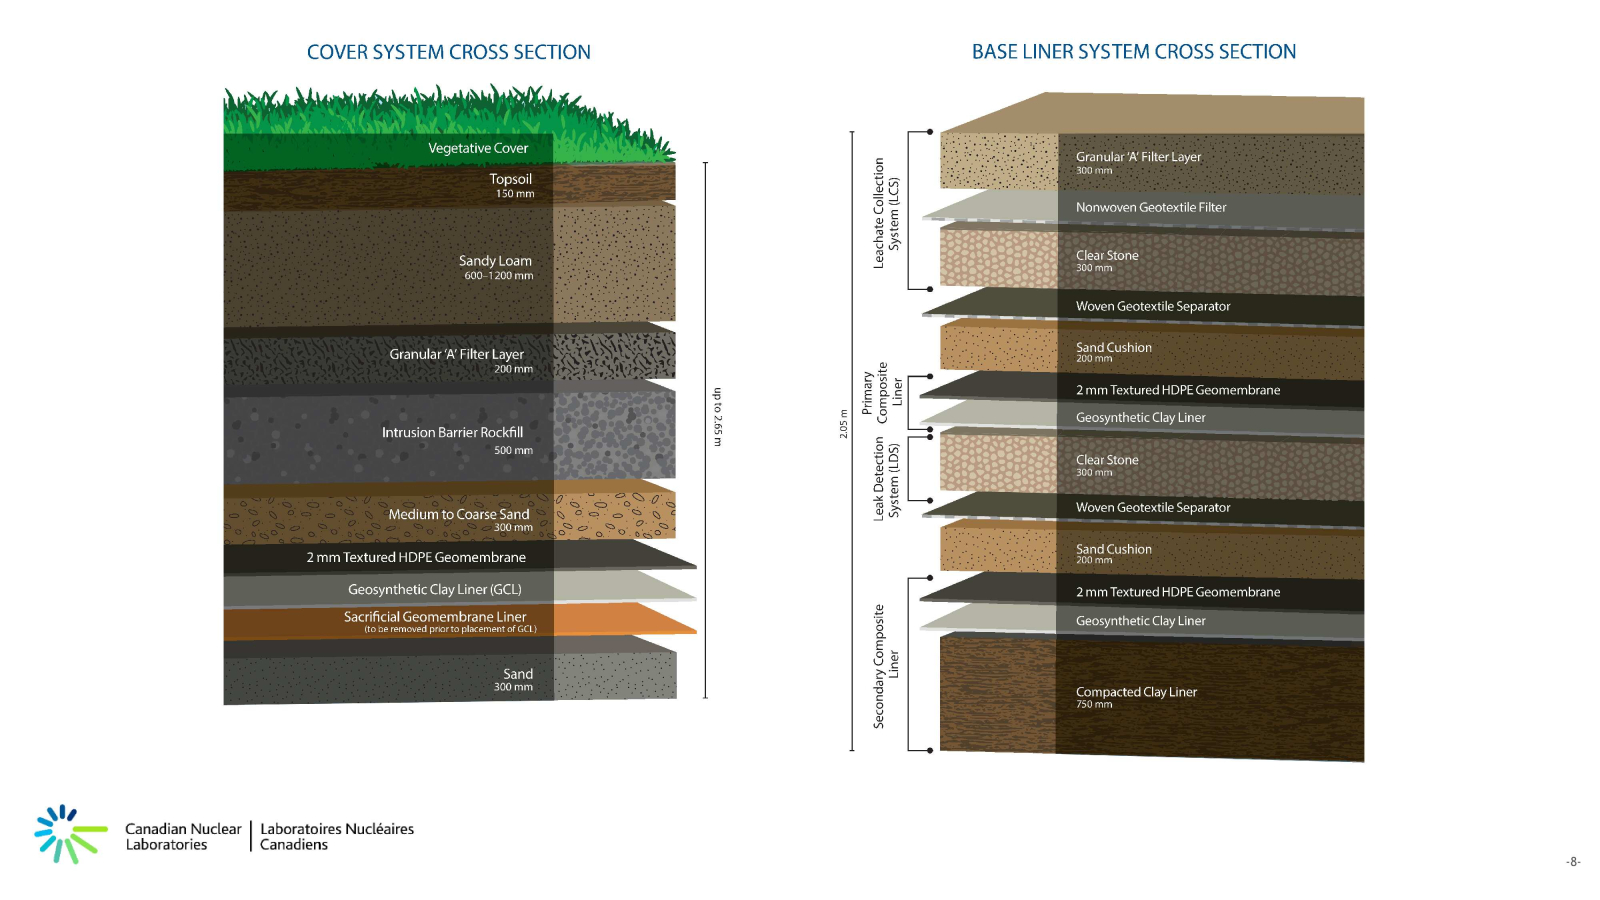 A cross section of the layers of dirt, sand and synthetic materials that will line the bottom and cover the top of the near surface disposal facility